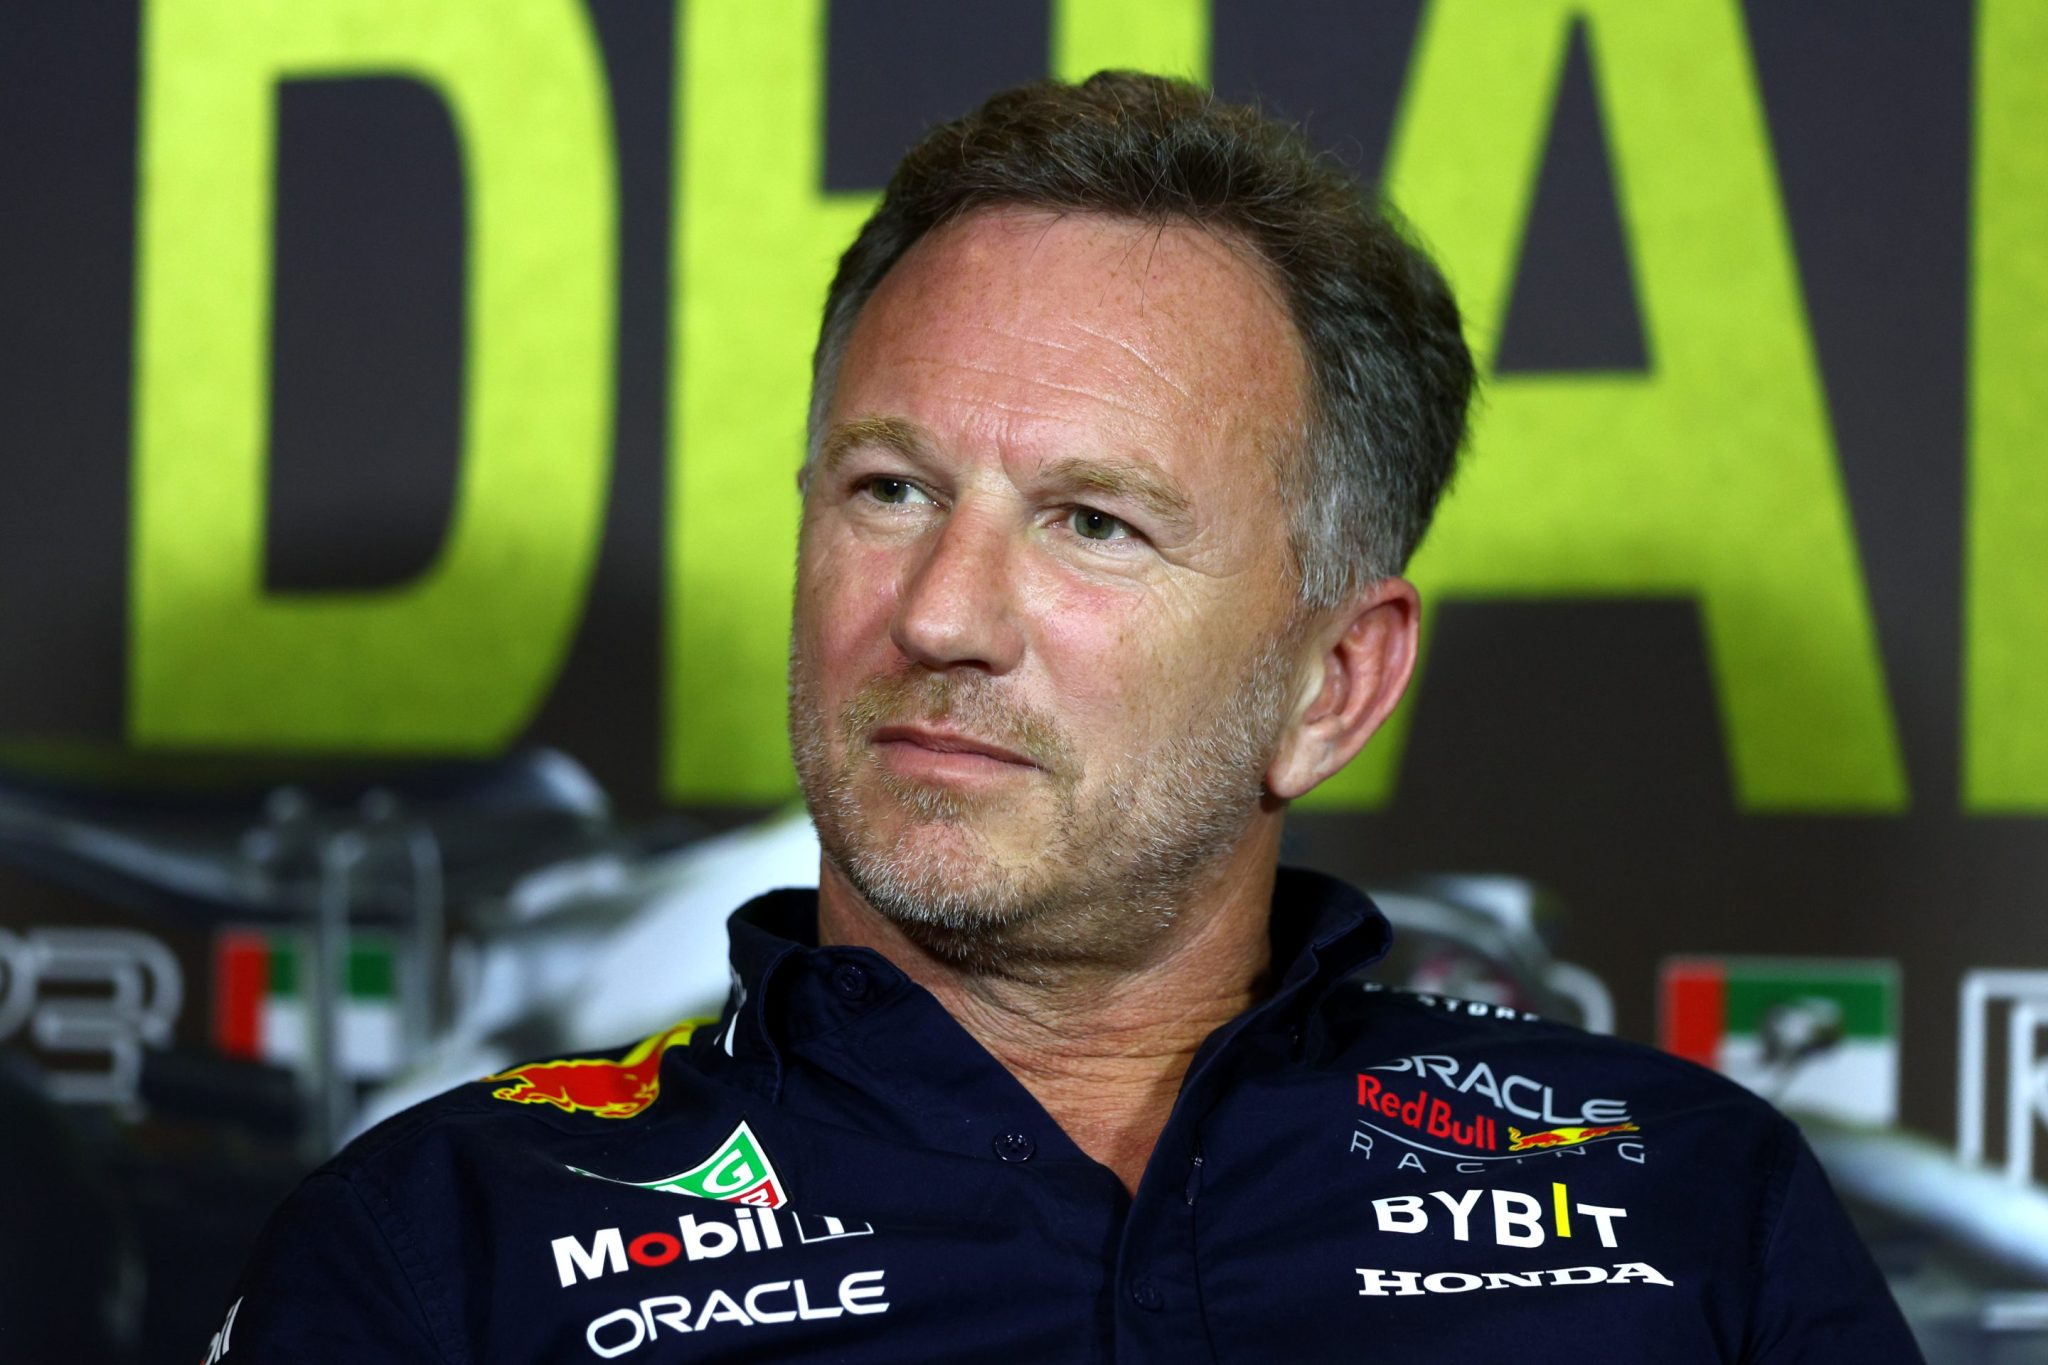 F1’s Red Bull’s Christian Horner denies misconduct allegations after leaks surface